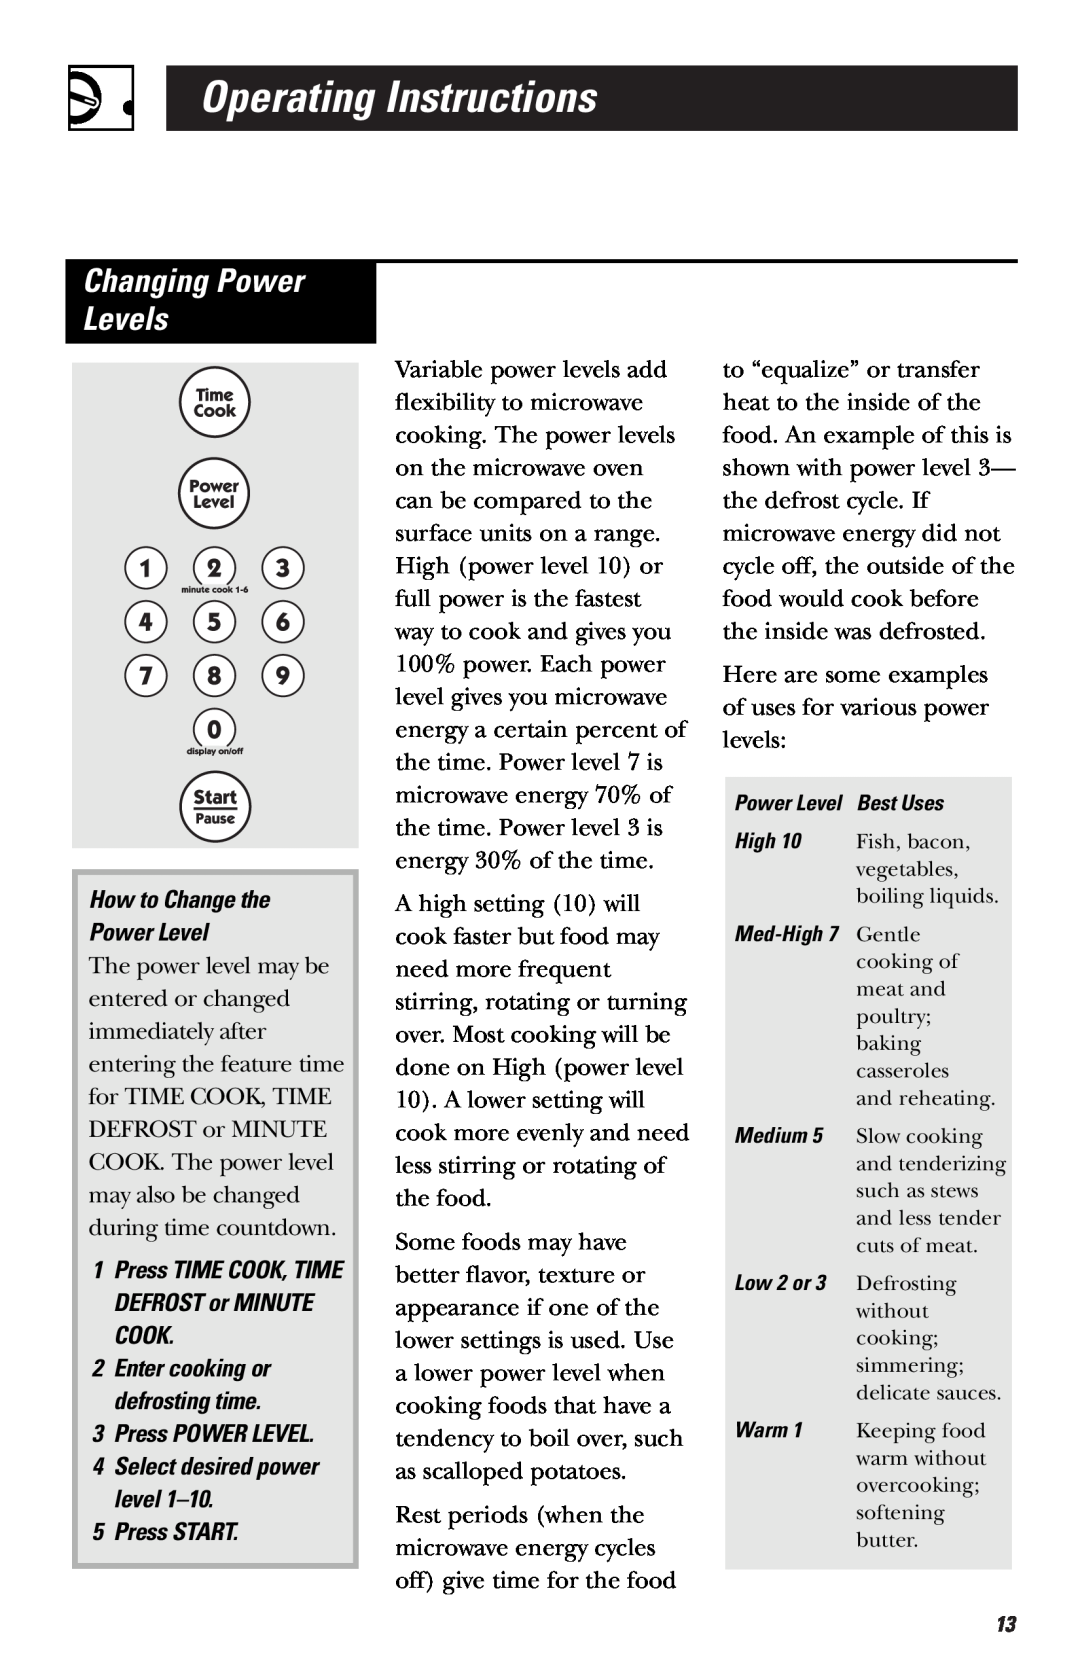 Hotpoint RVM1635 owner manual Changing Power Levels, Operating Instructions, How to Change the Power Level 